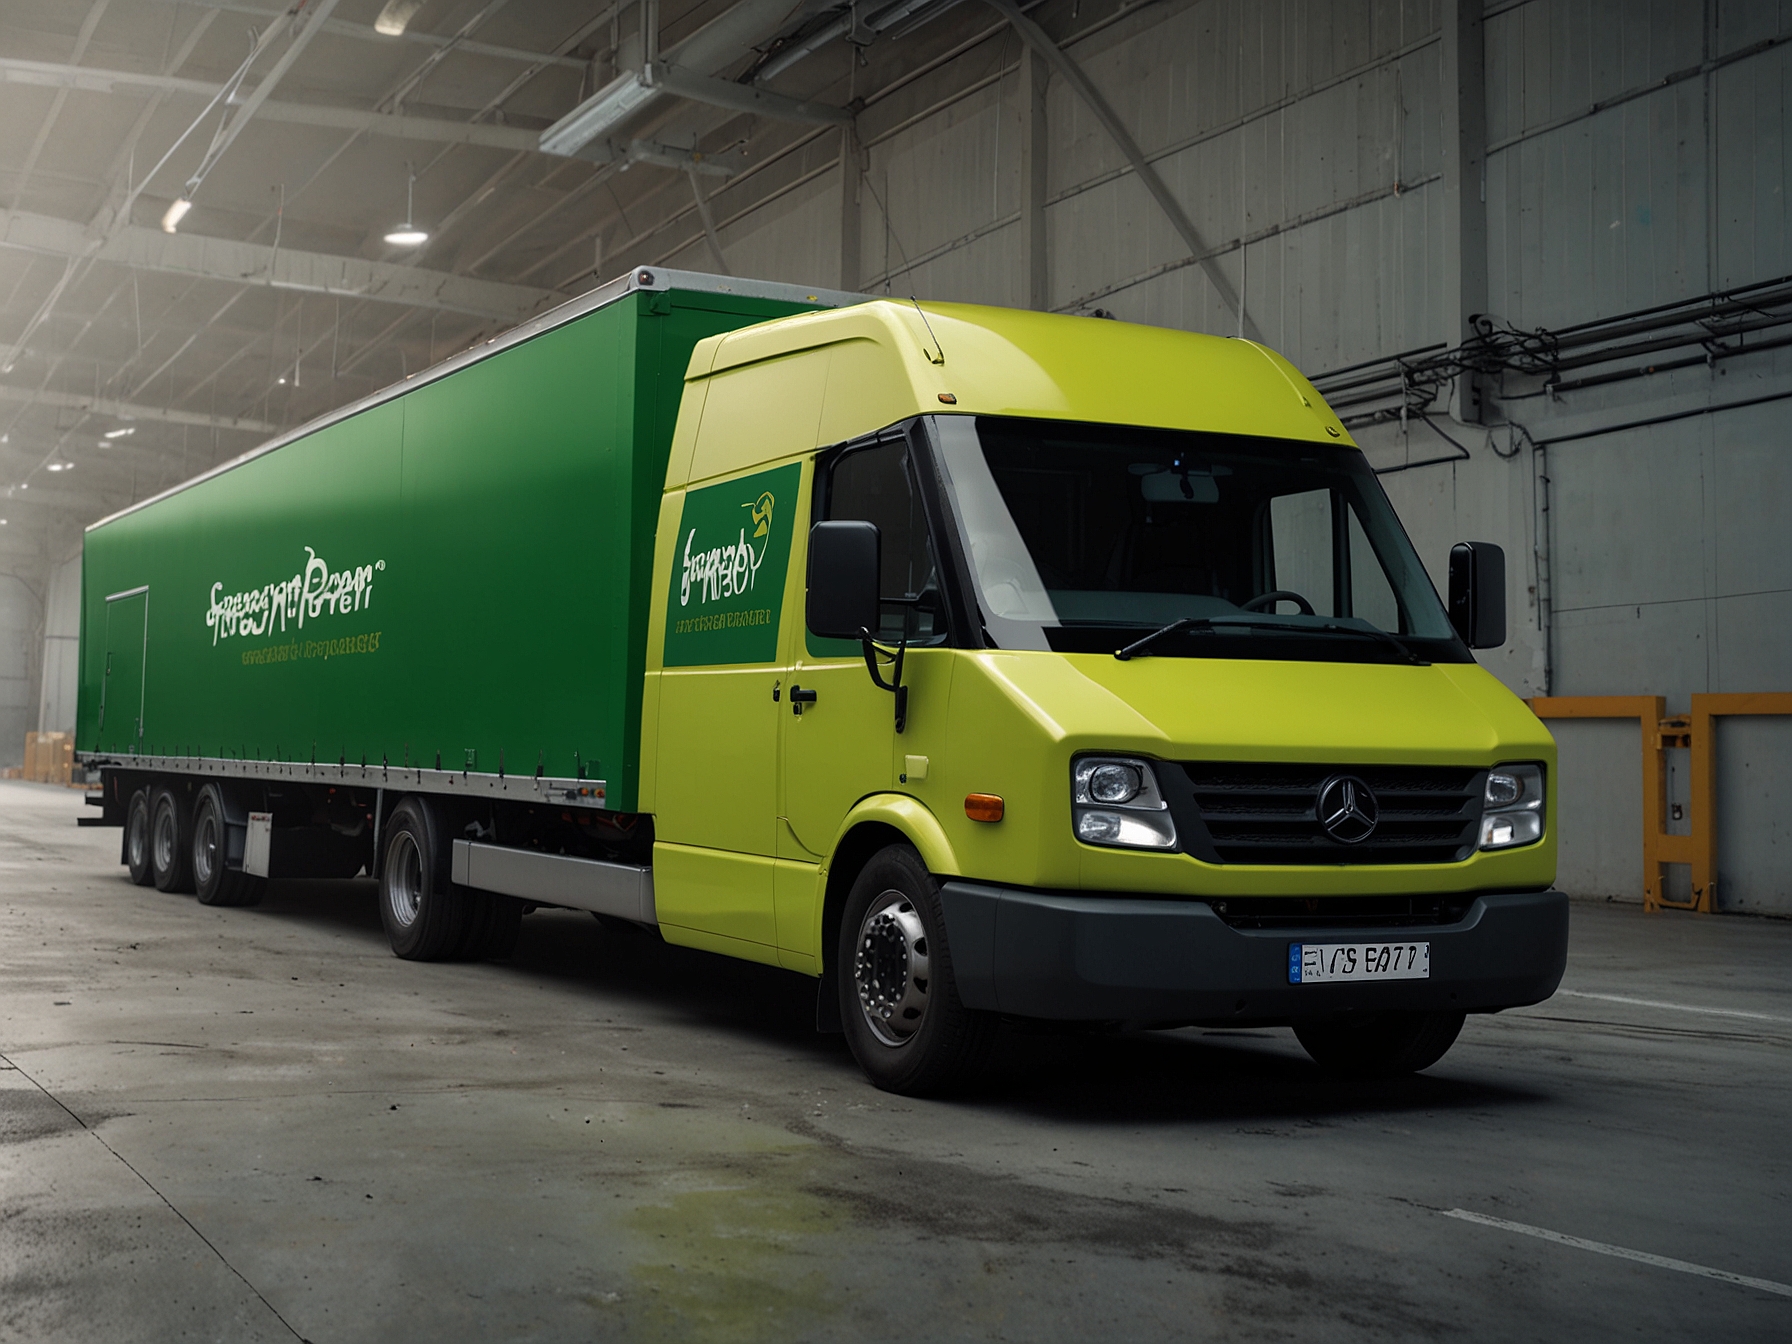 A photo of GreenPower's EV Star Cab & Chassis with bespoke truck bodies, highlighting the company's GP Truck Body division's efforts in providing streamlined delivery and high-quality upfitting services.